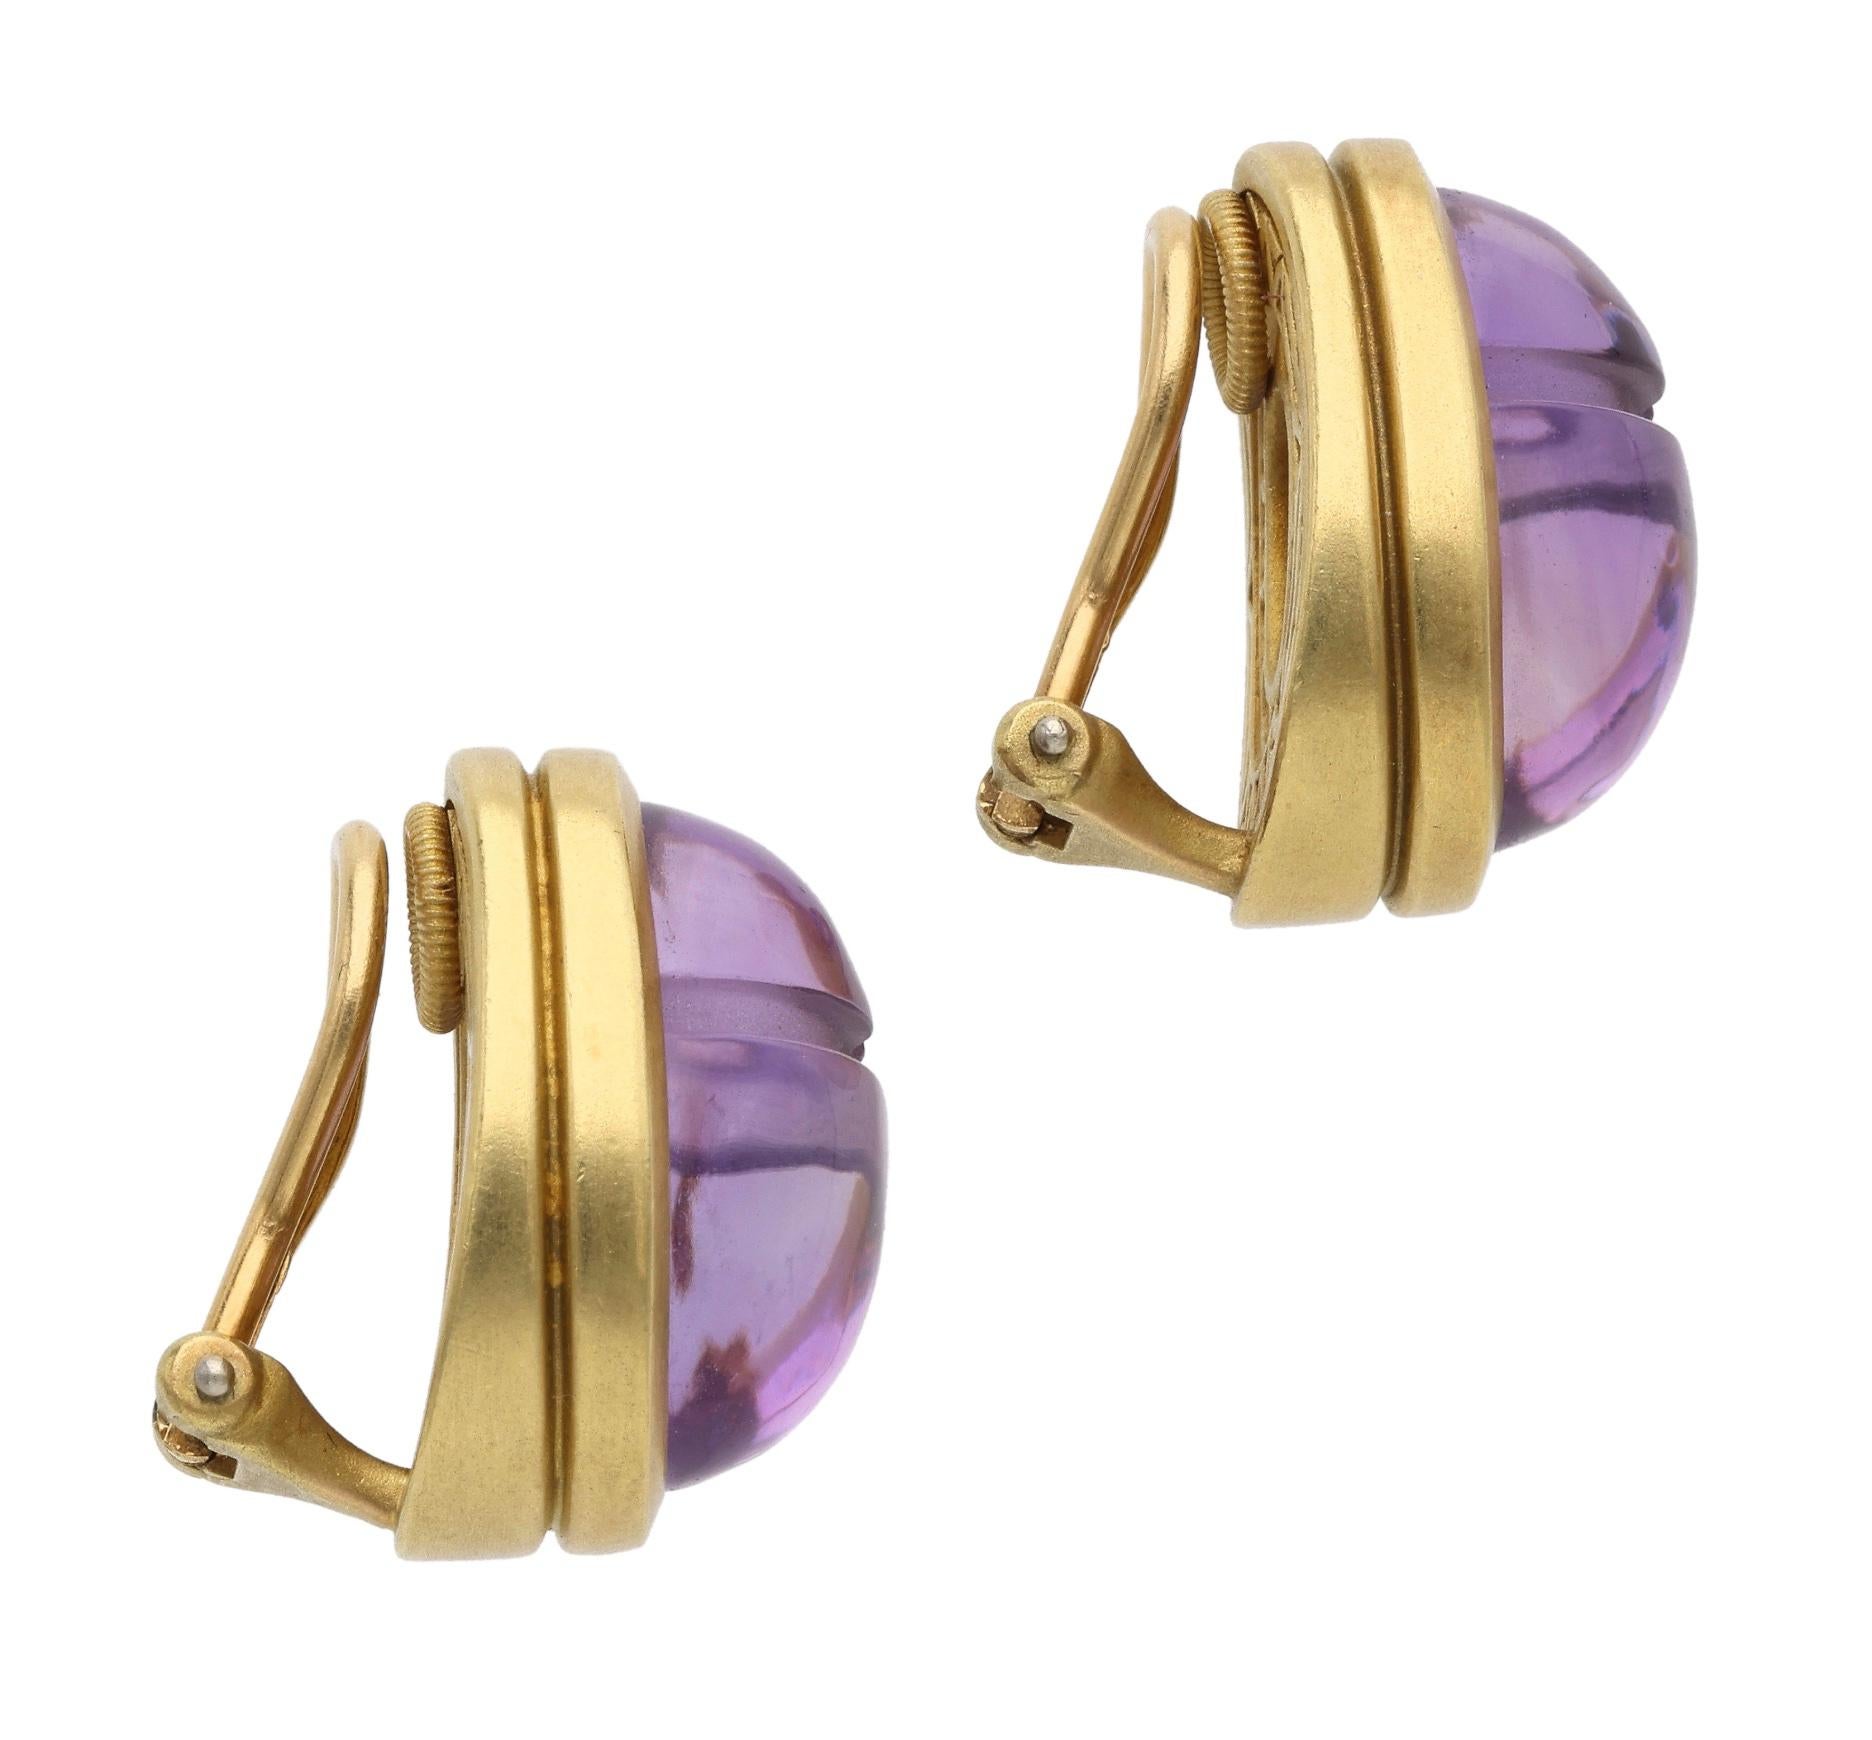 These ear clips are designed as scarab beetles, set with carved amethysts.

- Signed B Kieselstein-Cord
- 18 karat yellow gold
- Total weight 22.84 grams
- Length 1 inch

The condition report is Very Good. 